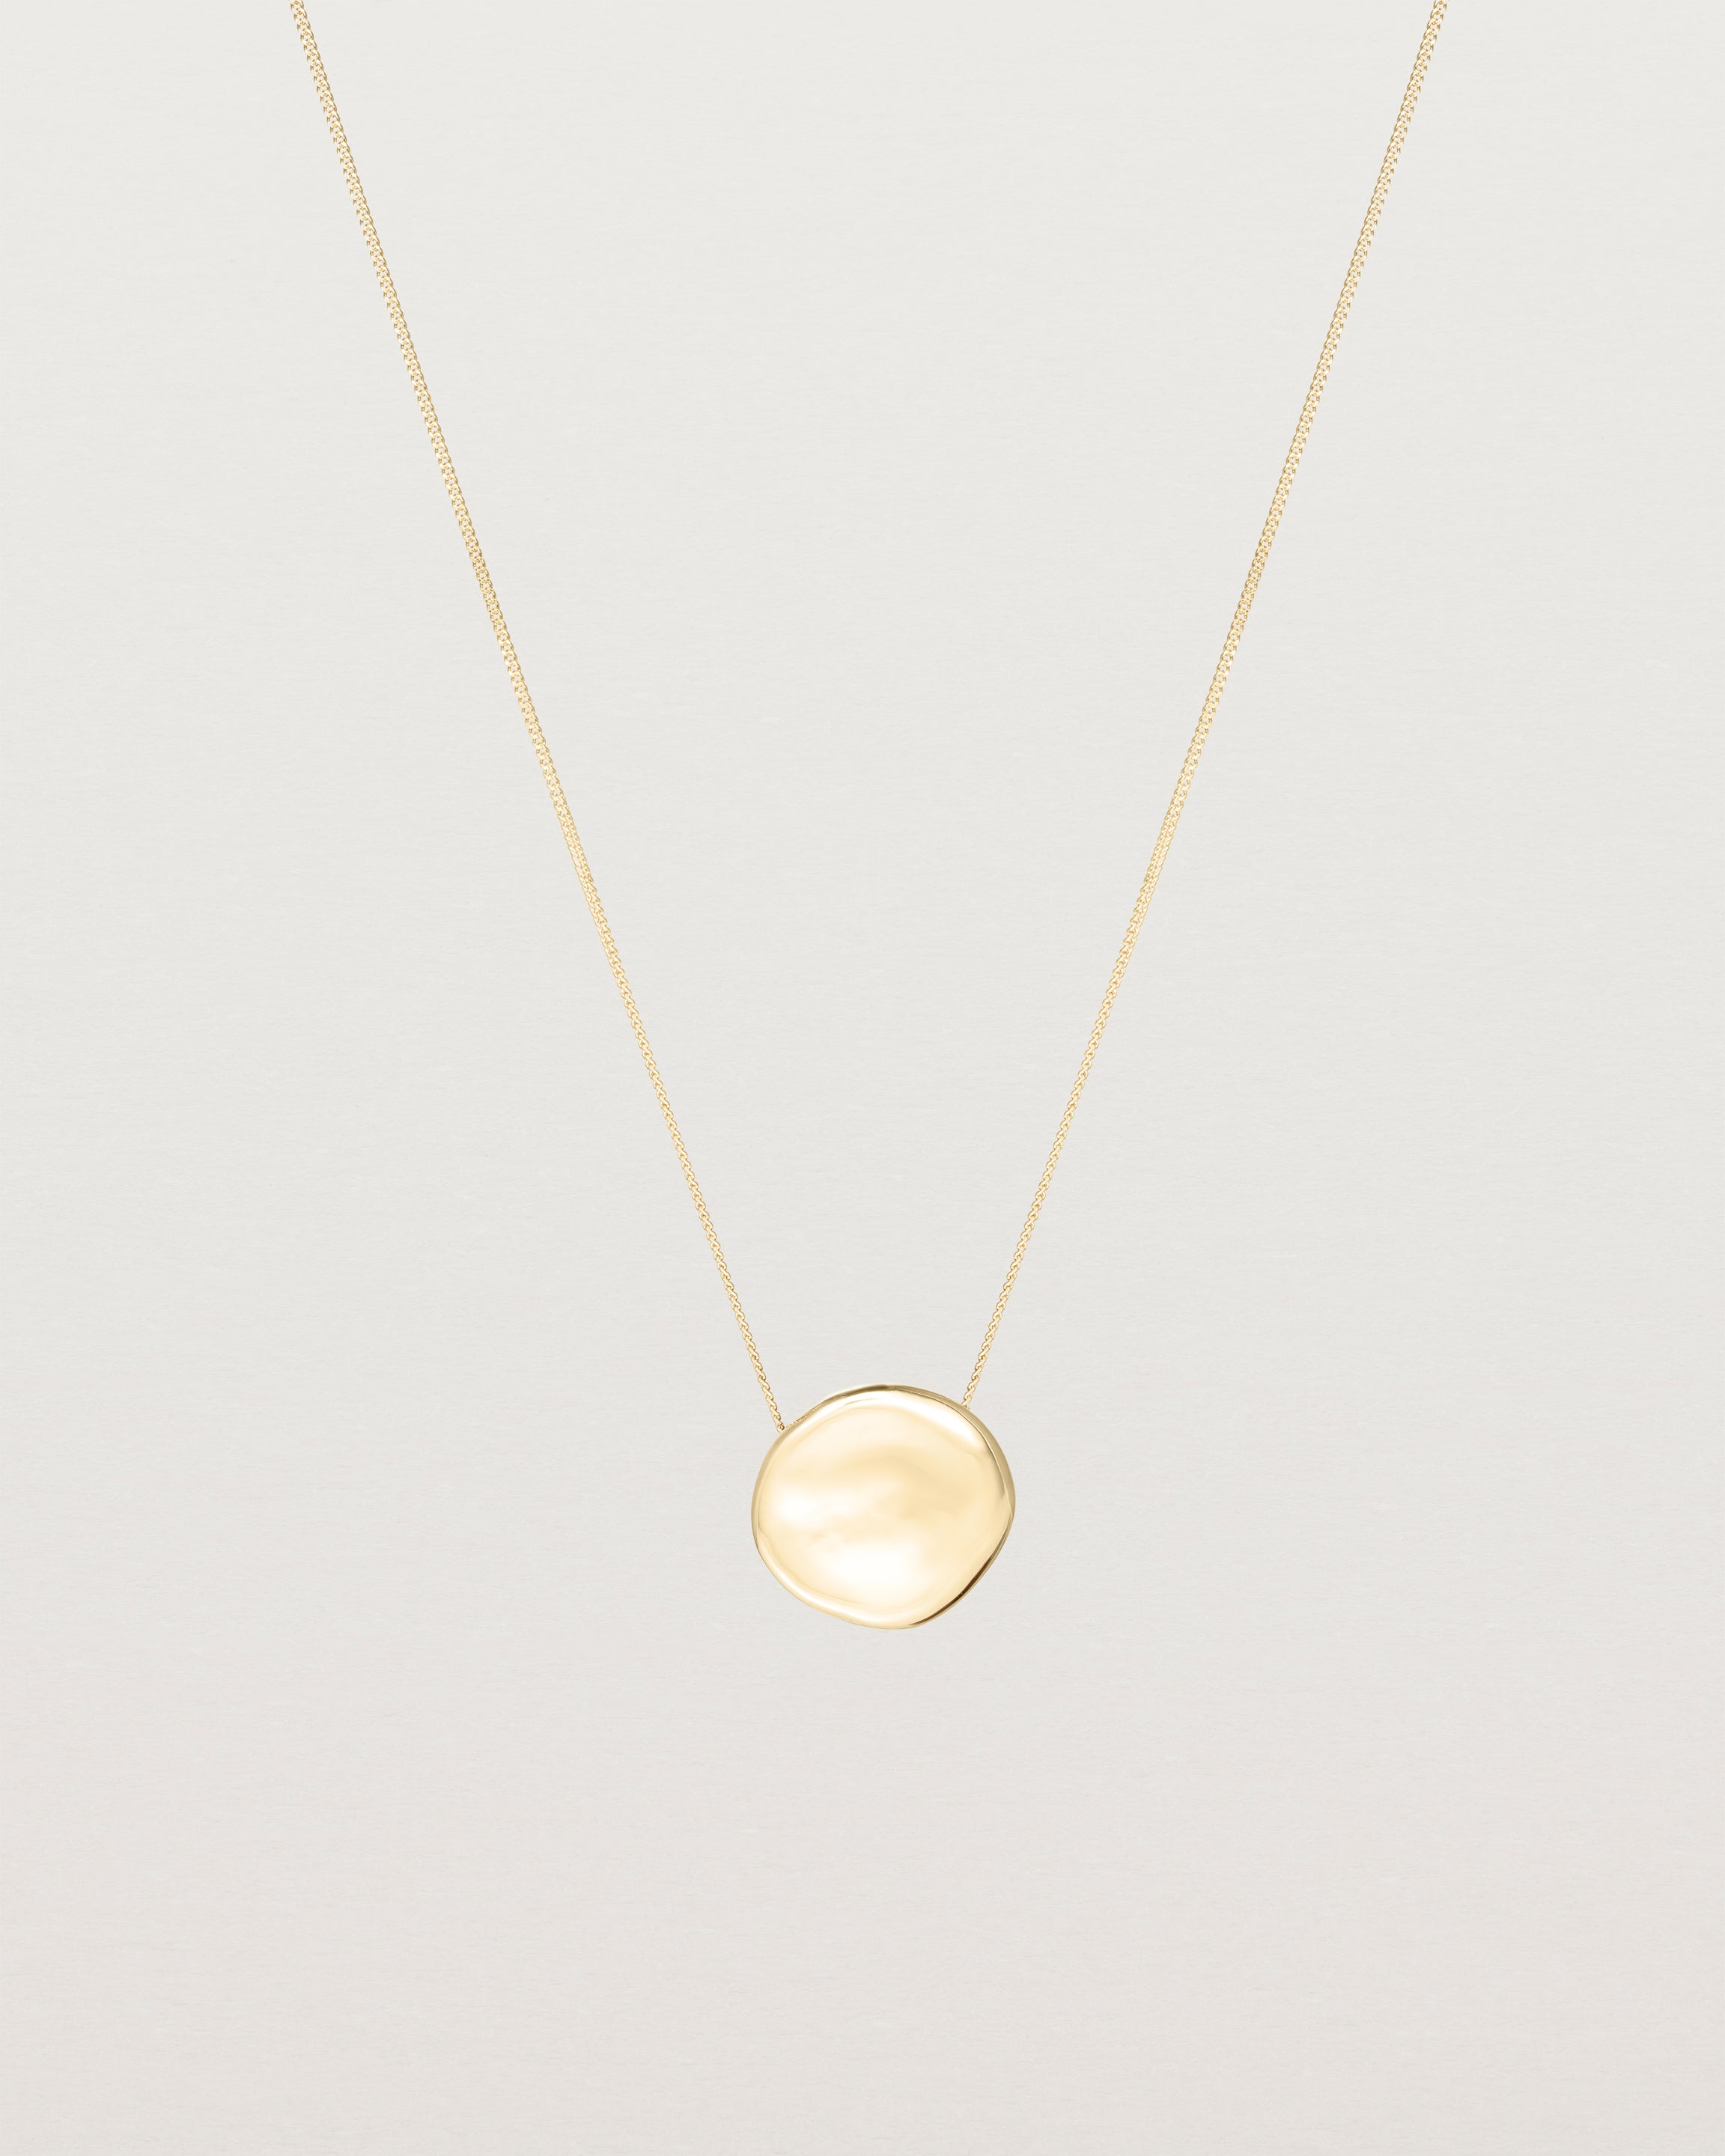 Front view of the Mana Necklace in yellow gold.